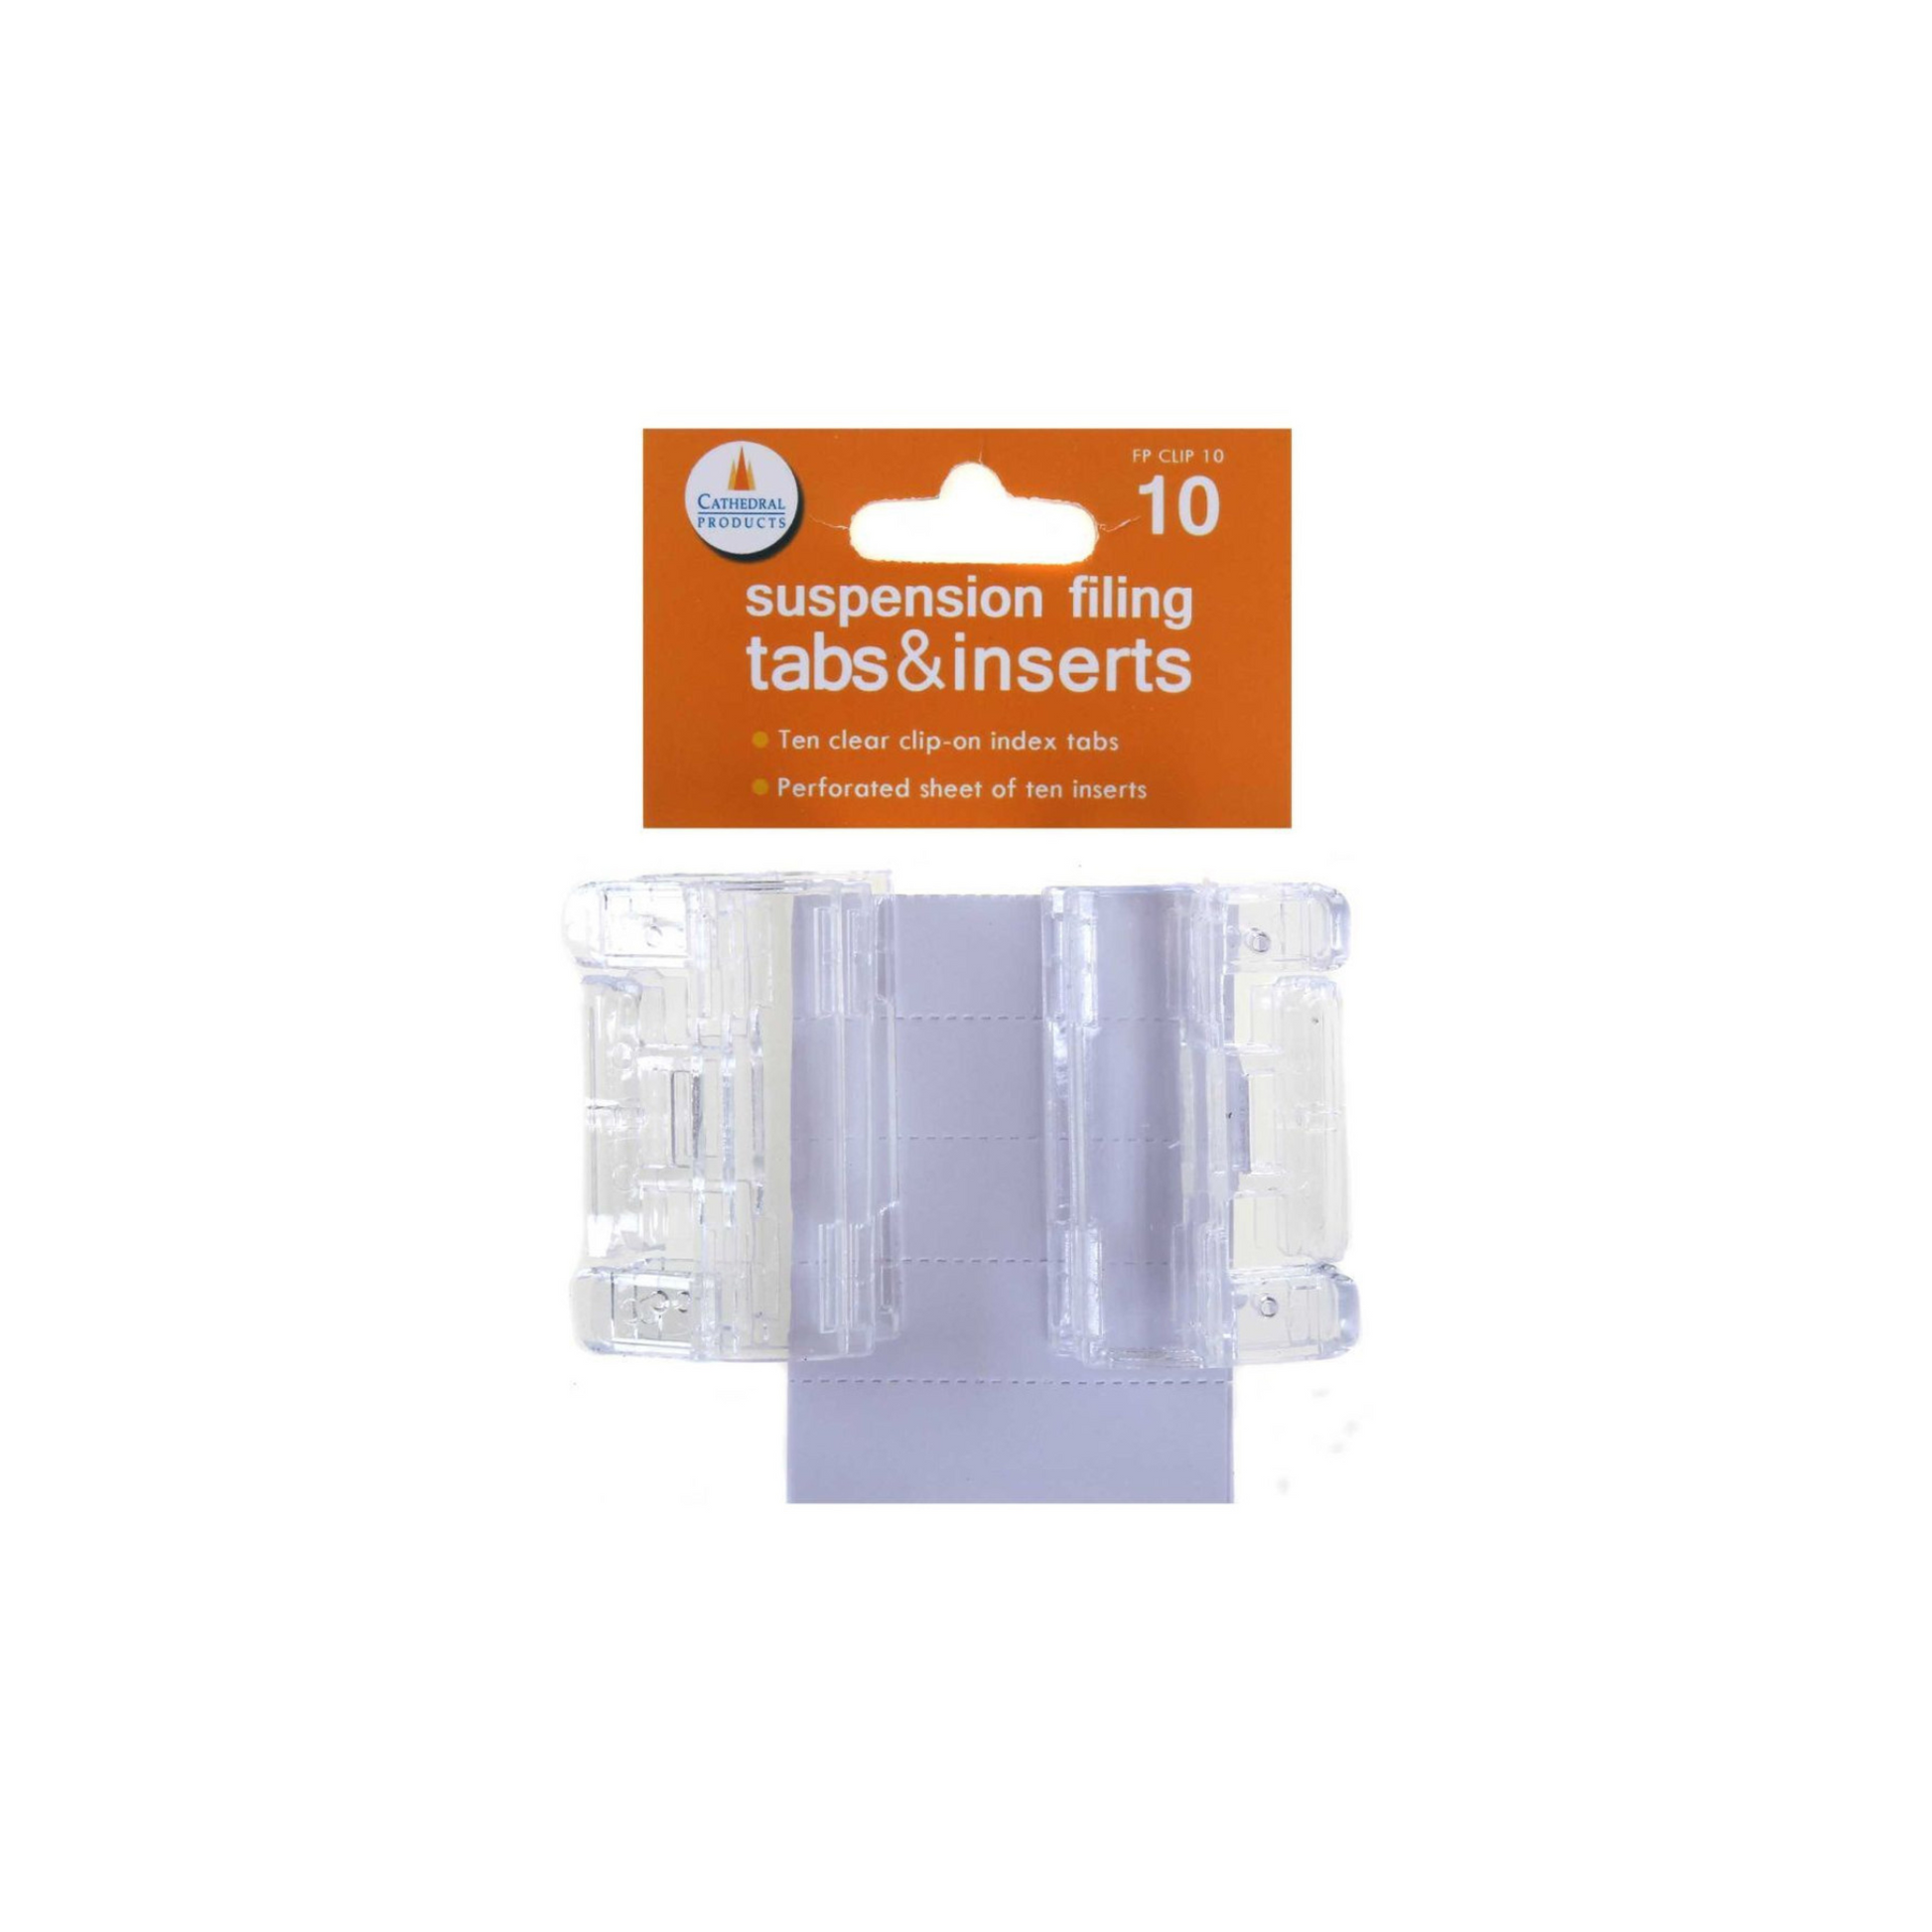 Packaging of Cathedral Products suspension filing tabs and inserts, containing ten clear clip-on index tabs and a perforated sheet of ten inserts. The packaging is orange and white with product information and branding displayed.